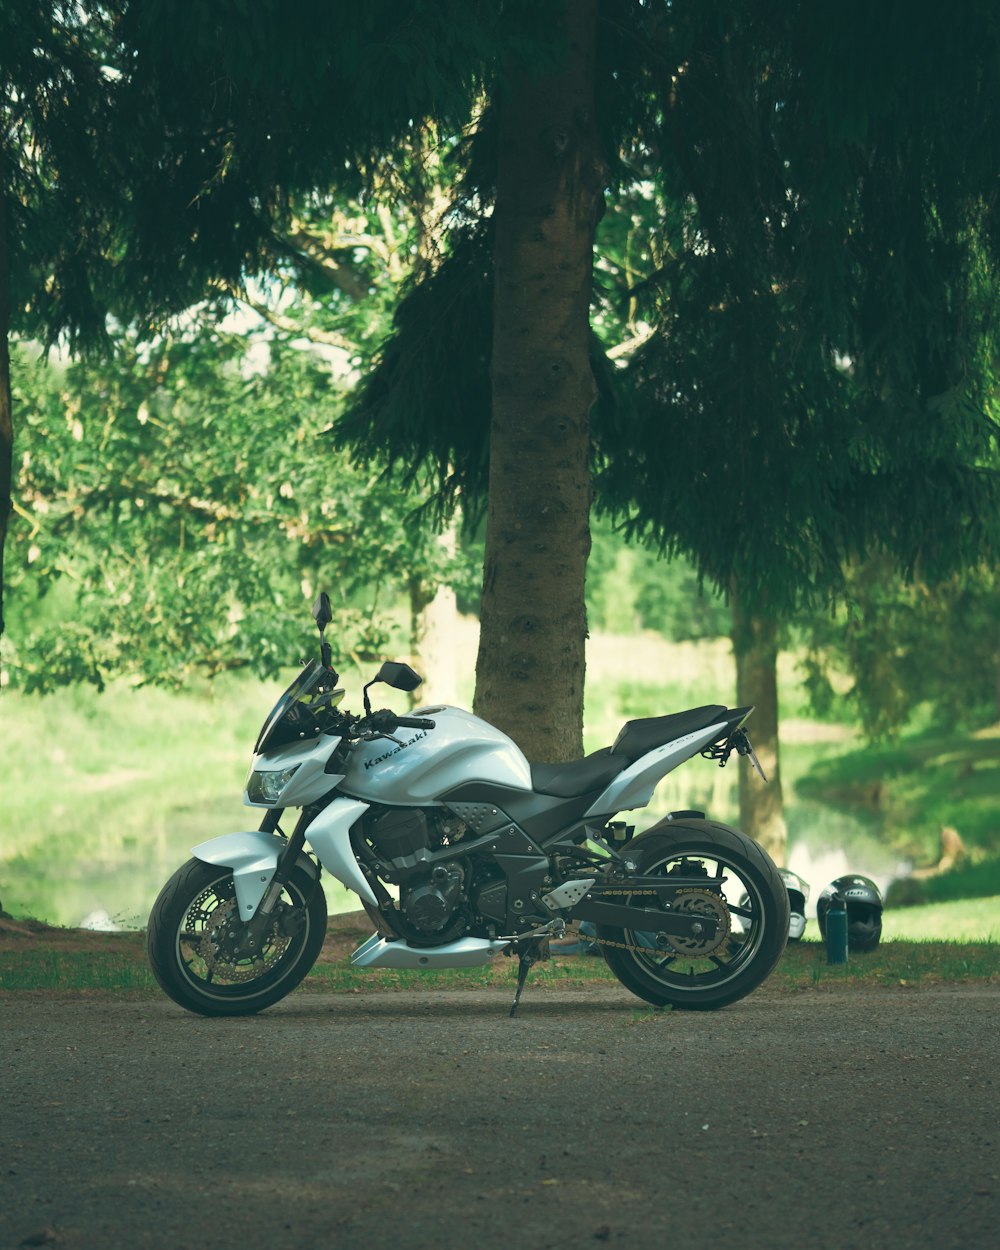 a motorcycle parked in the shade of a tree